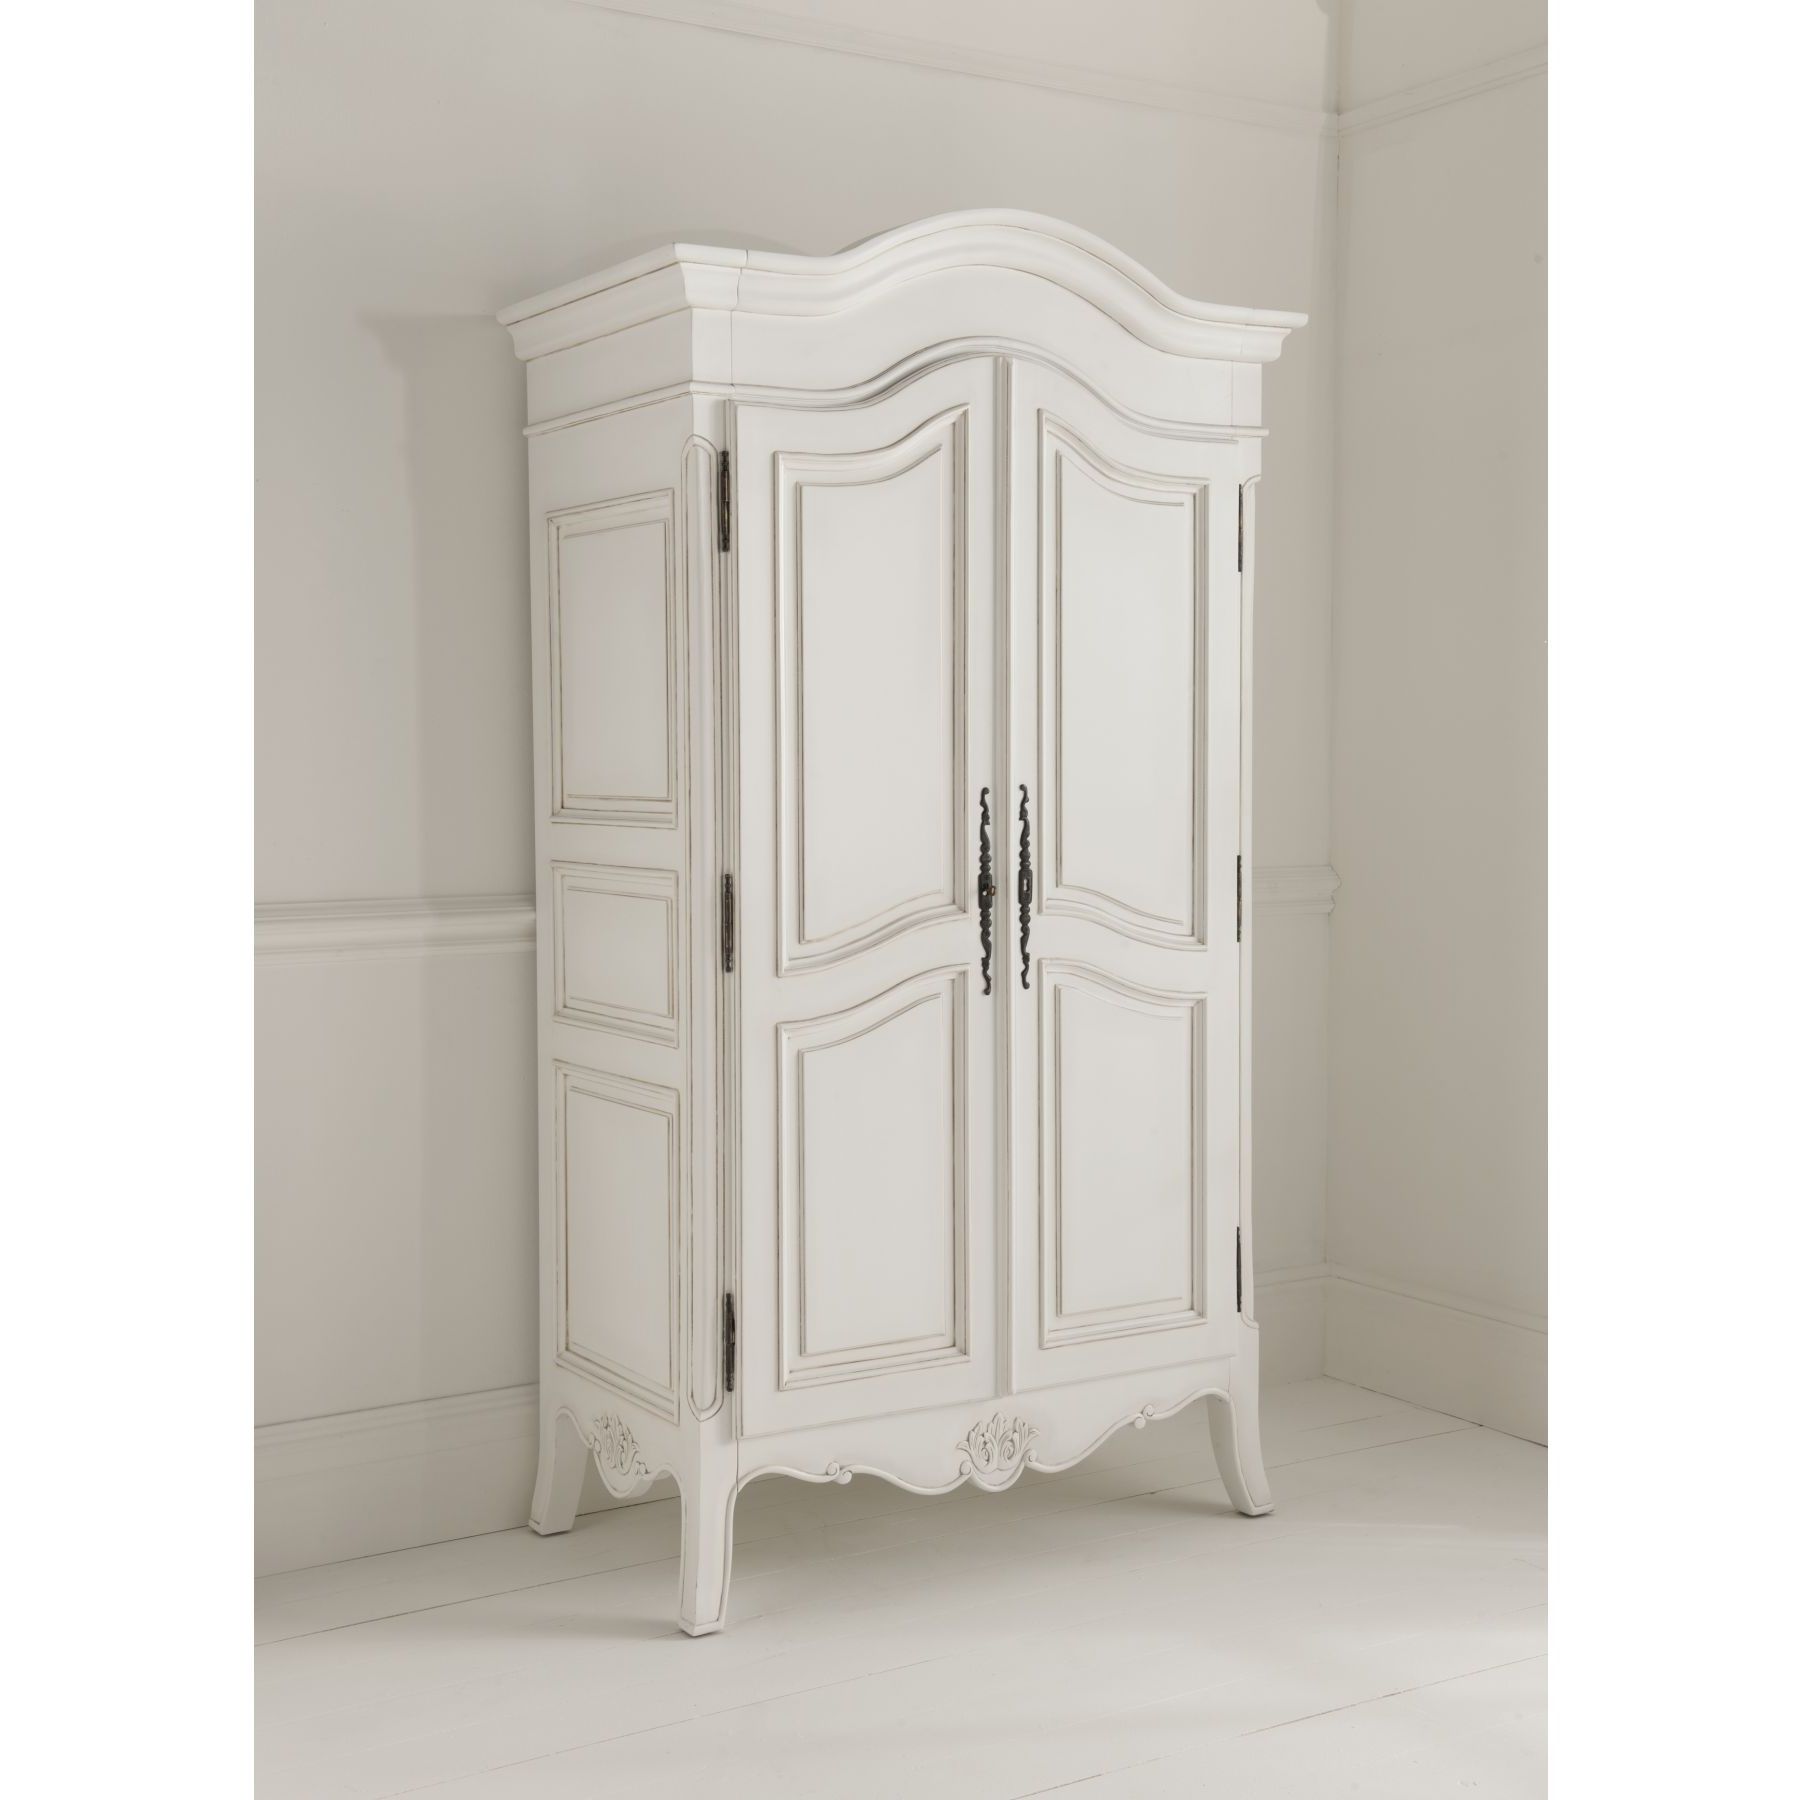 Furniture: Exciting Armoire Wardrobe For Interior Storage Design Pertaining To Trendy Vintage Shabby Chic Wardrobes (View 8 of 15)